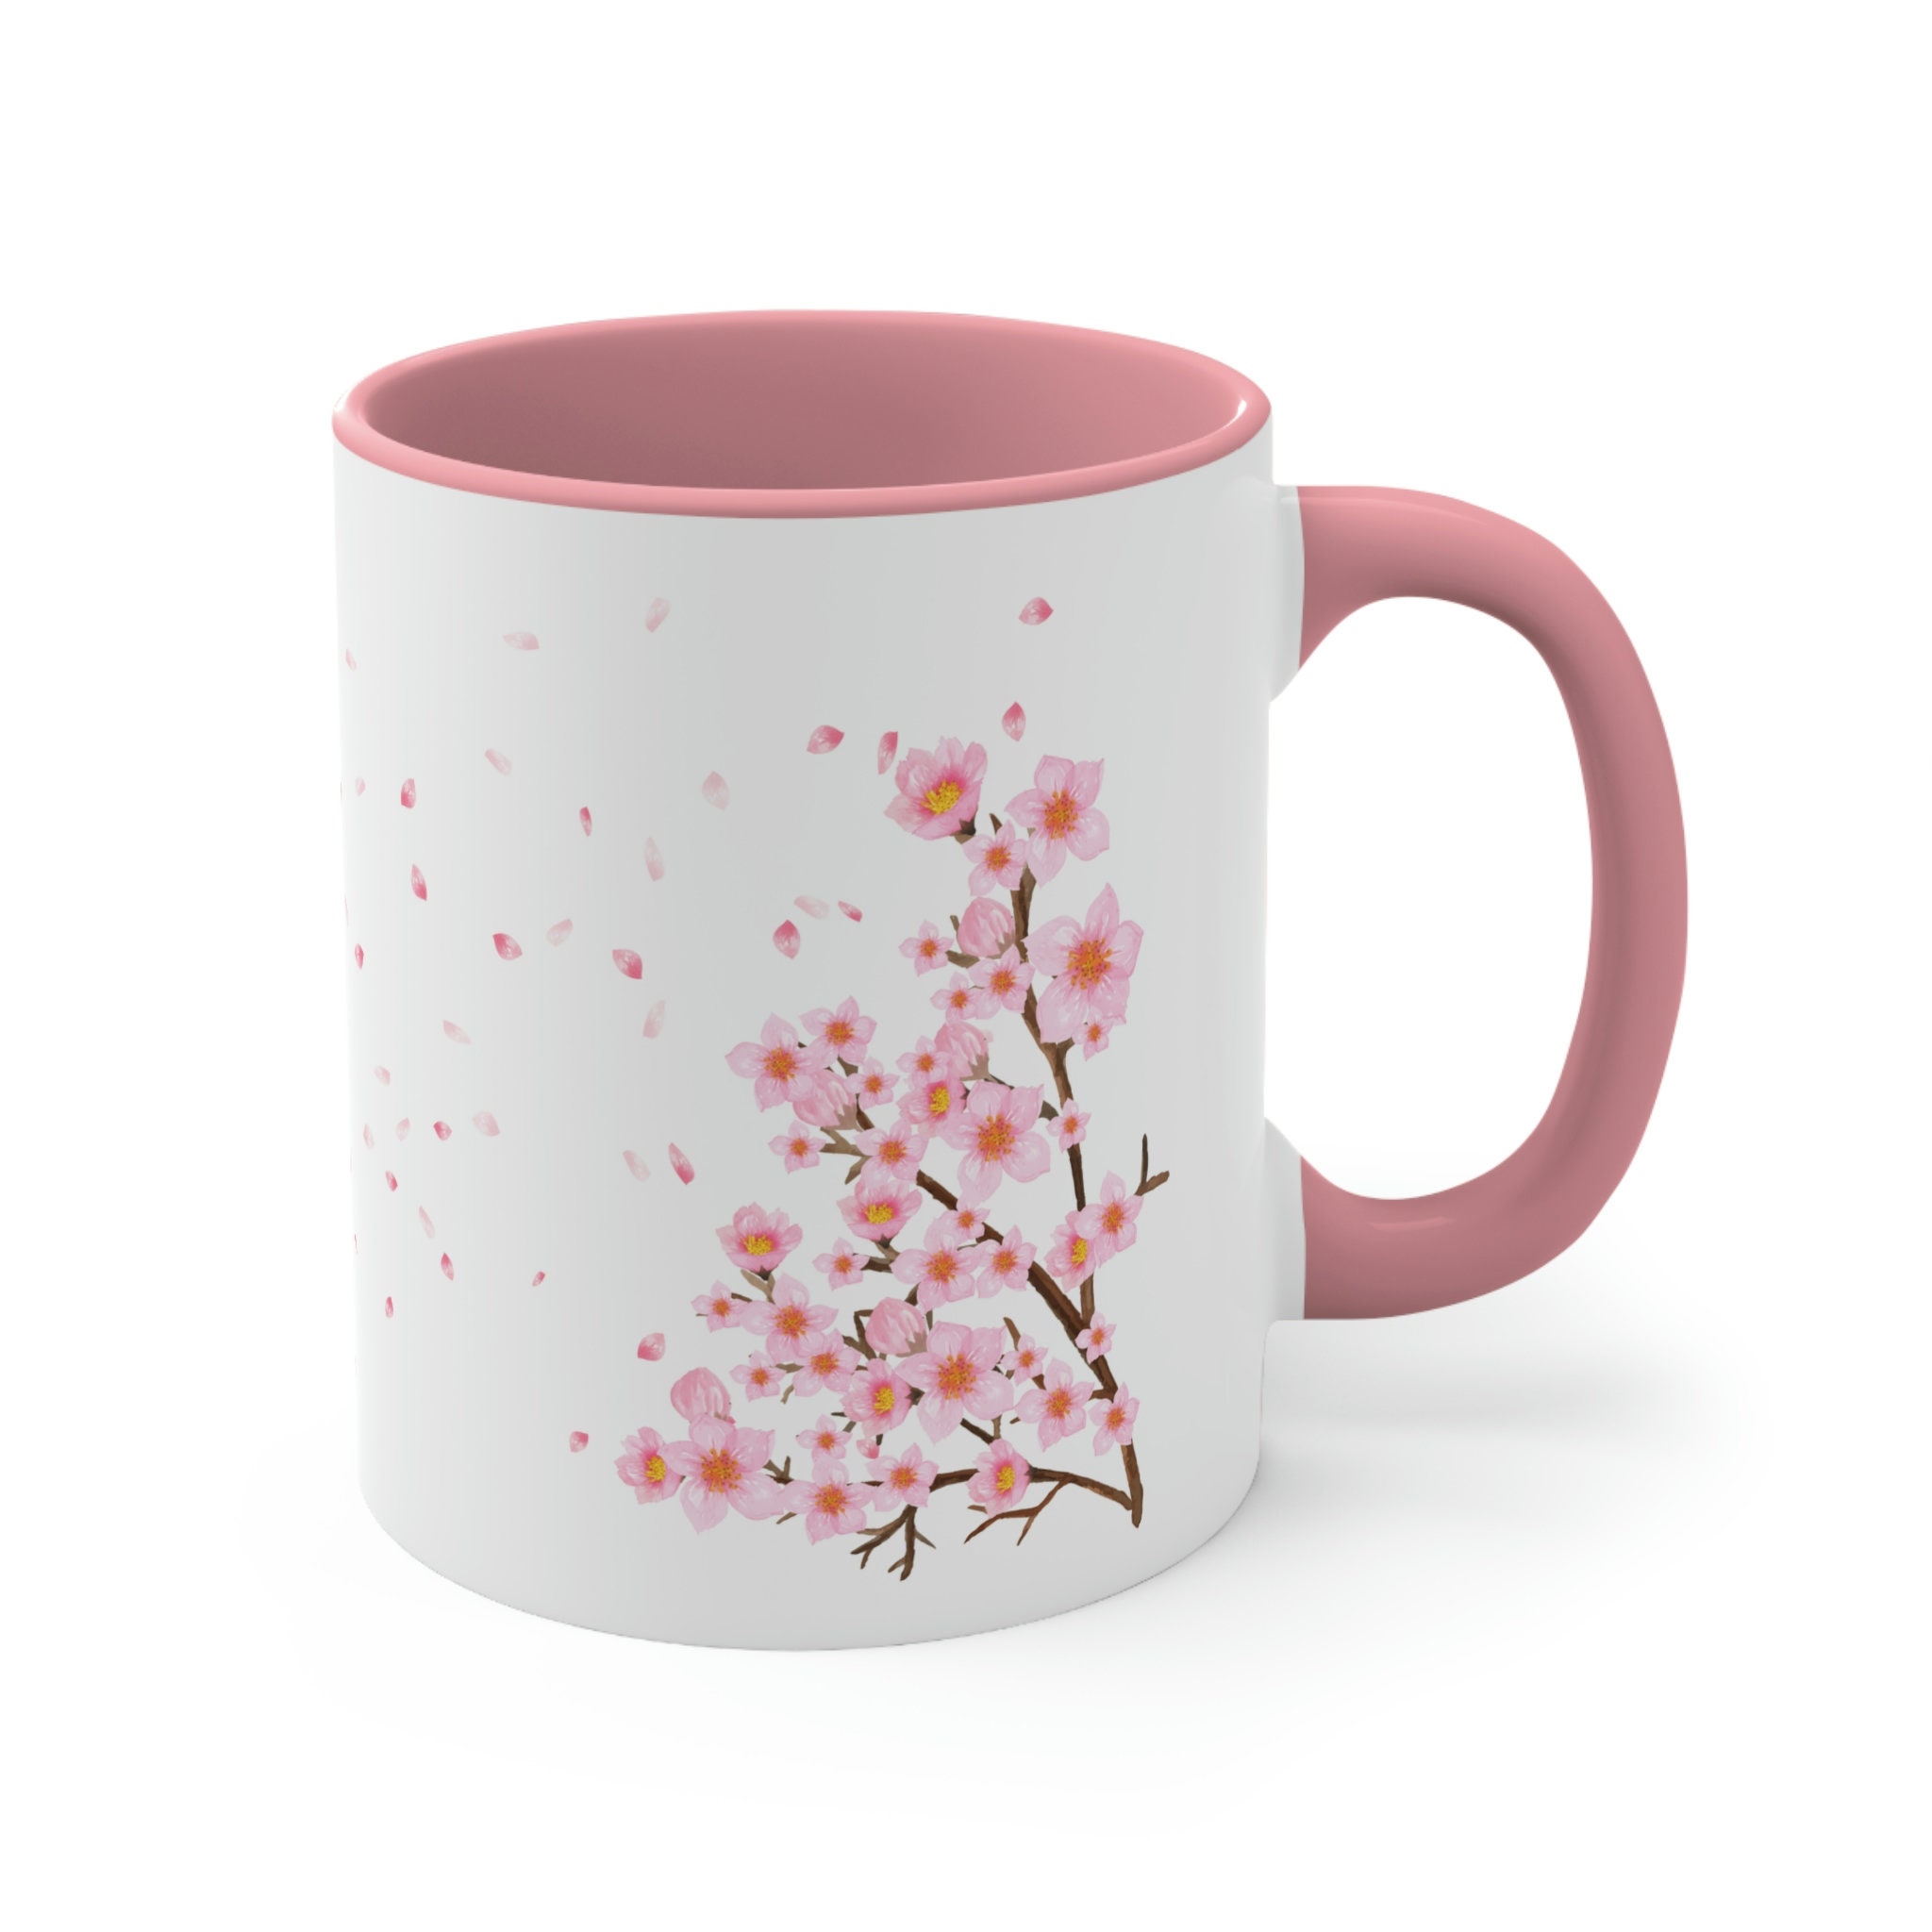  Novelty Pink Sakura High Boron Glass Cup with Ceramic Lid  Stainless Steel Spoon Drinking Cup 500ml/17oz Clear Measuring Scale Coffee  Mug with Handle Cute Cherry Blossom Water Cups for Milk Juice